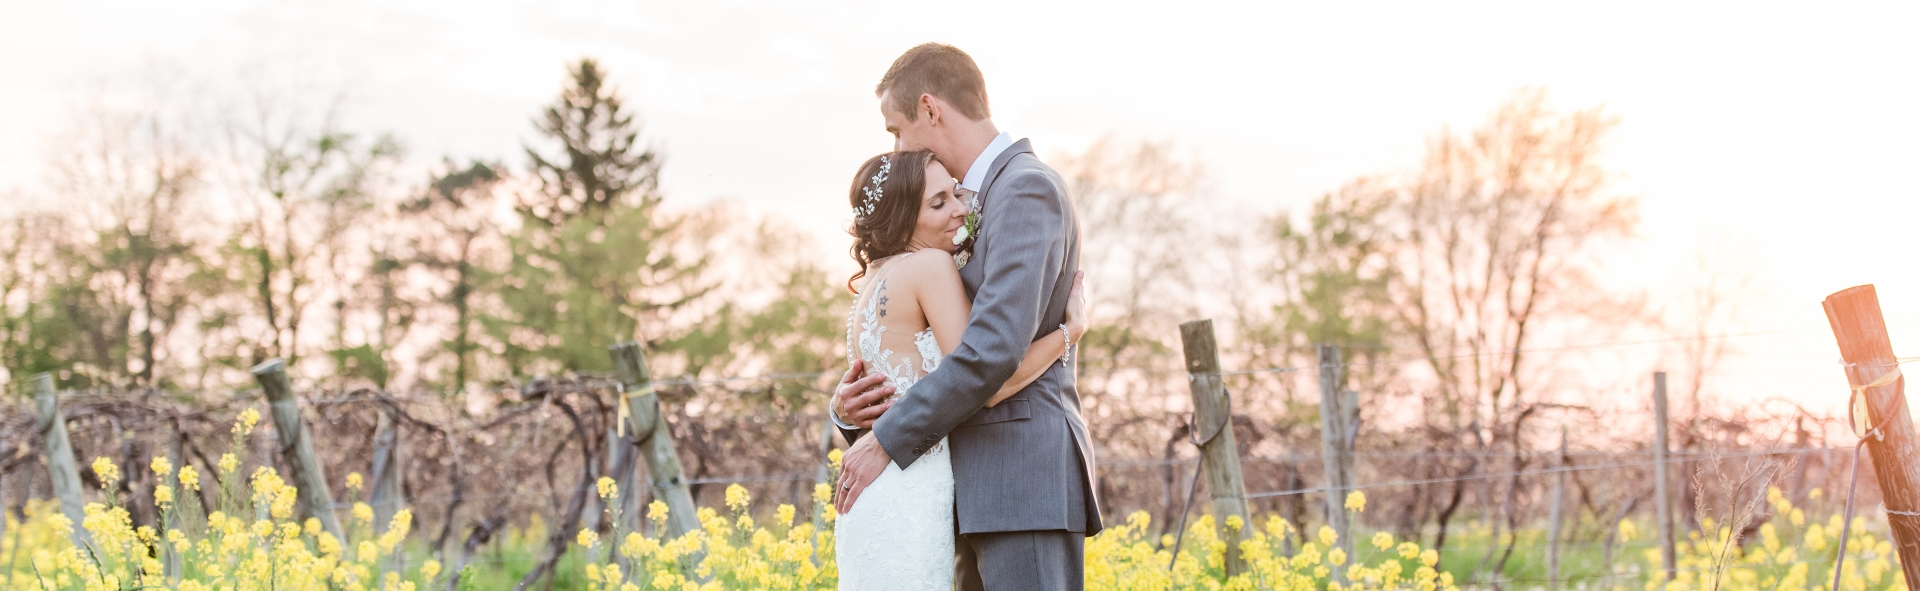 Kevin & Stacie’s Quincy Cellars Wedding